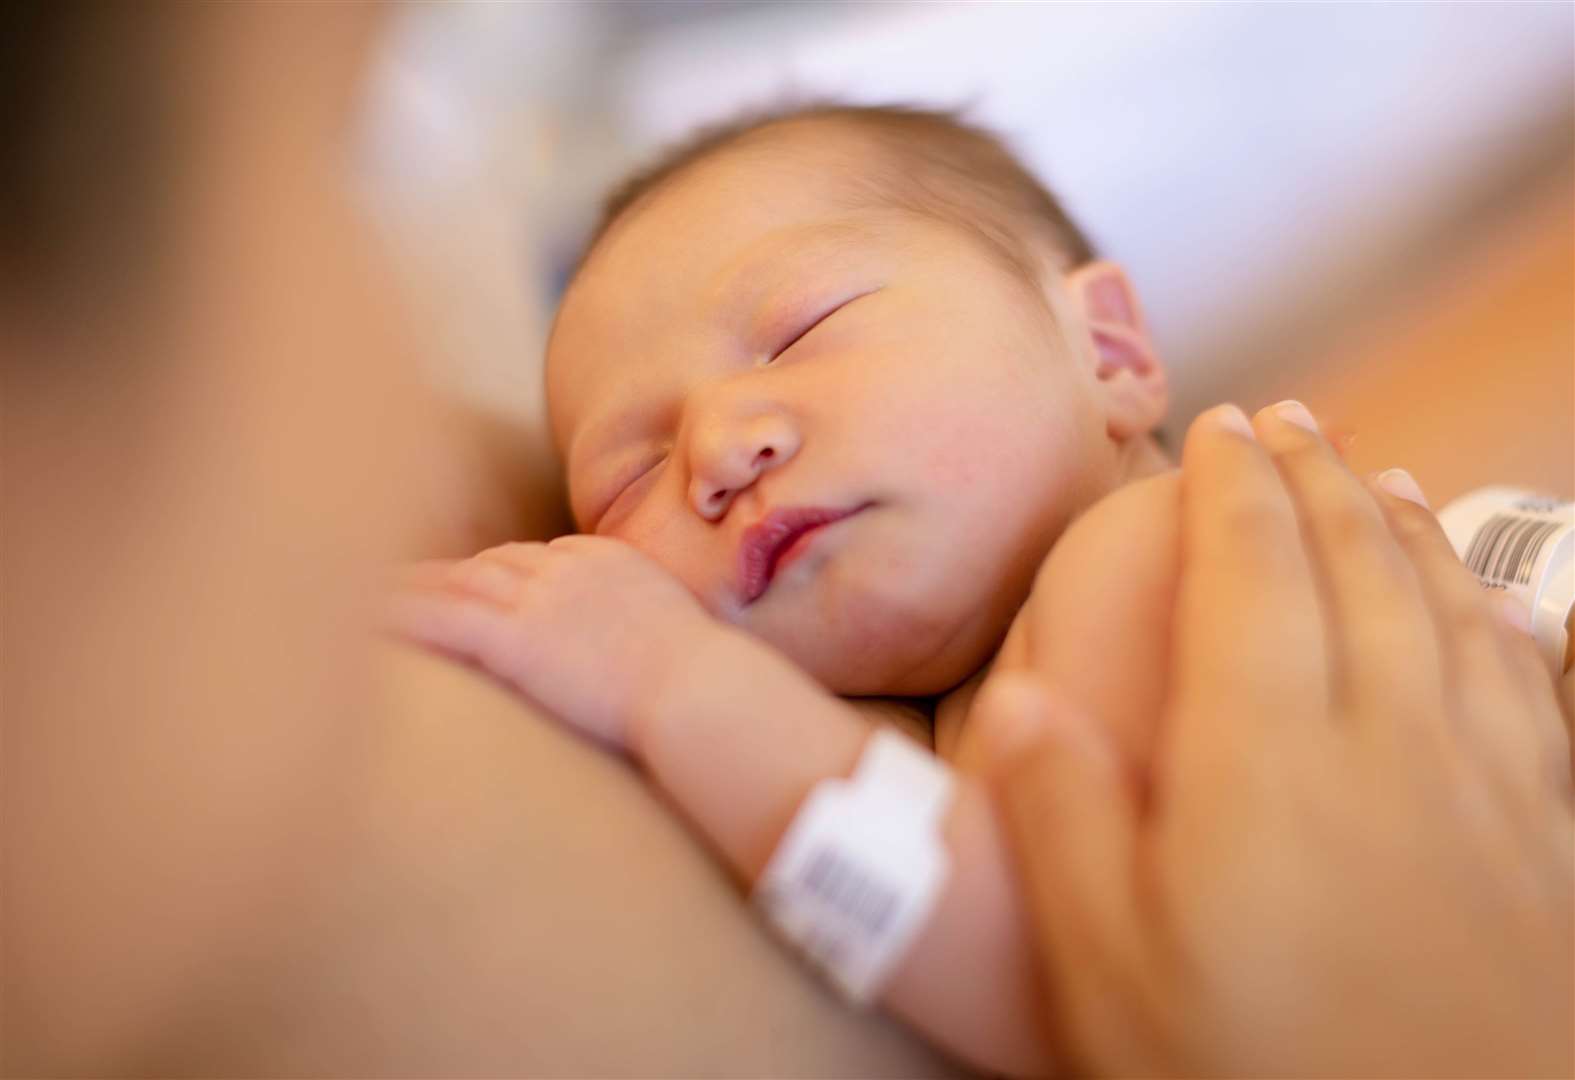 The Trust Funds were set up for children born between 2002 and 2011. Image: iStock.